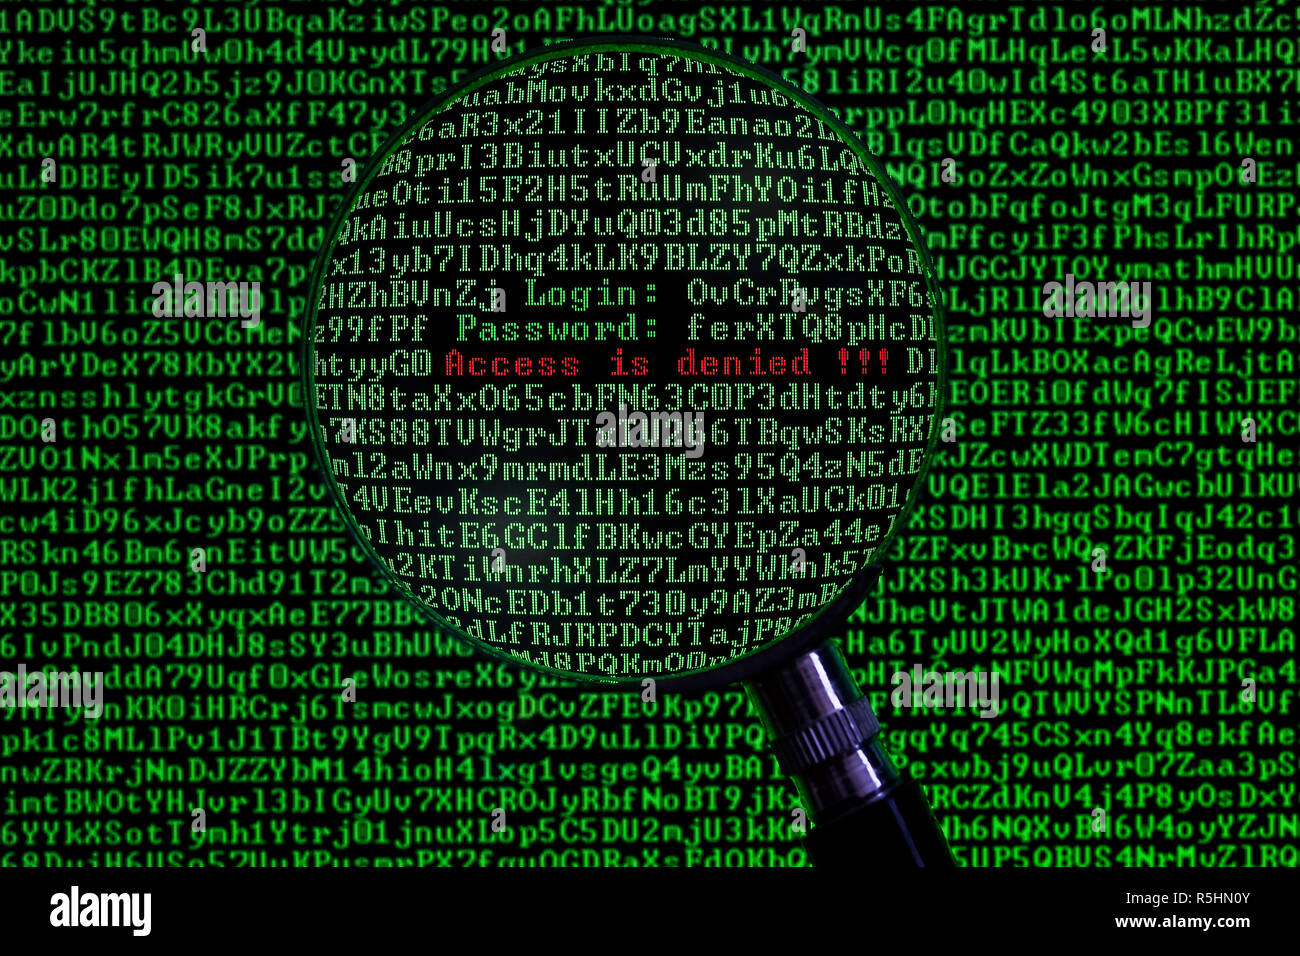 Concept of computer hacking in the form of a personal computer screen viewed through a magnifying glass Stock Photo